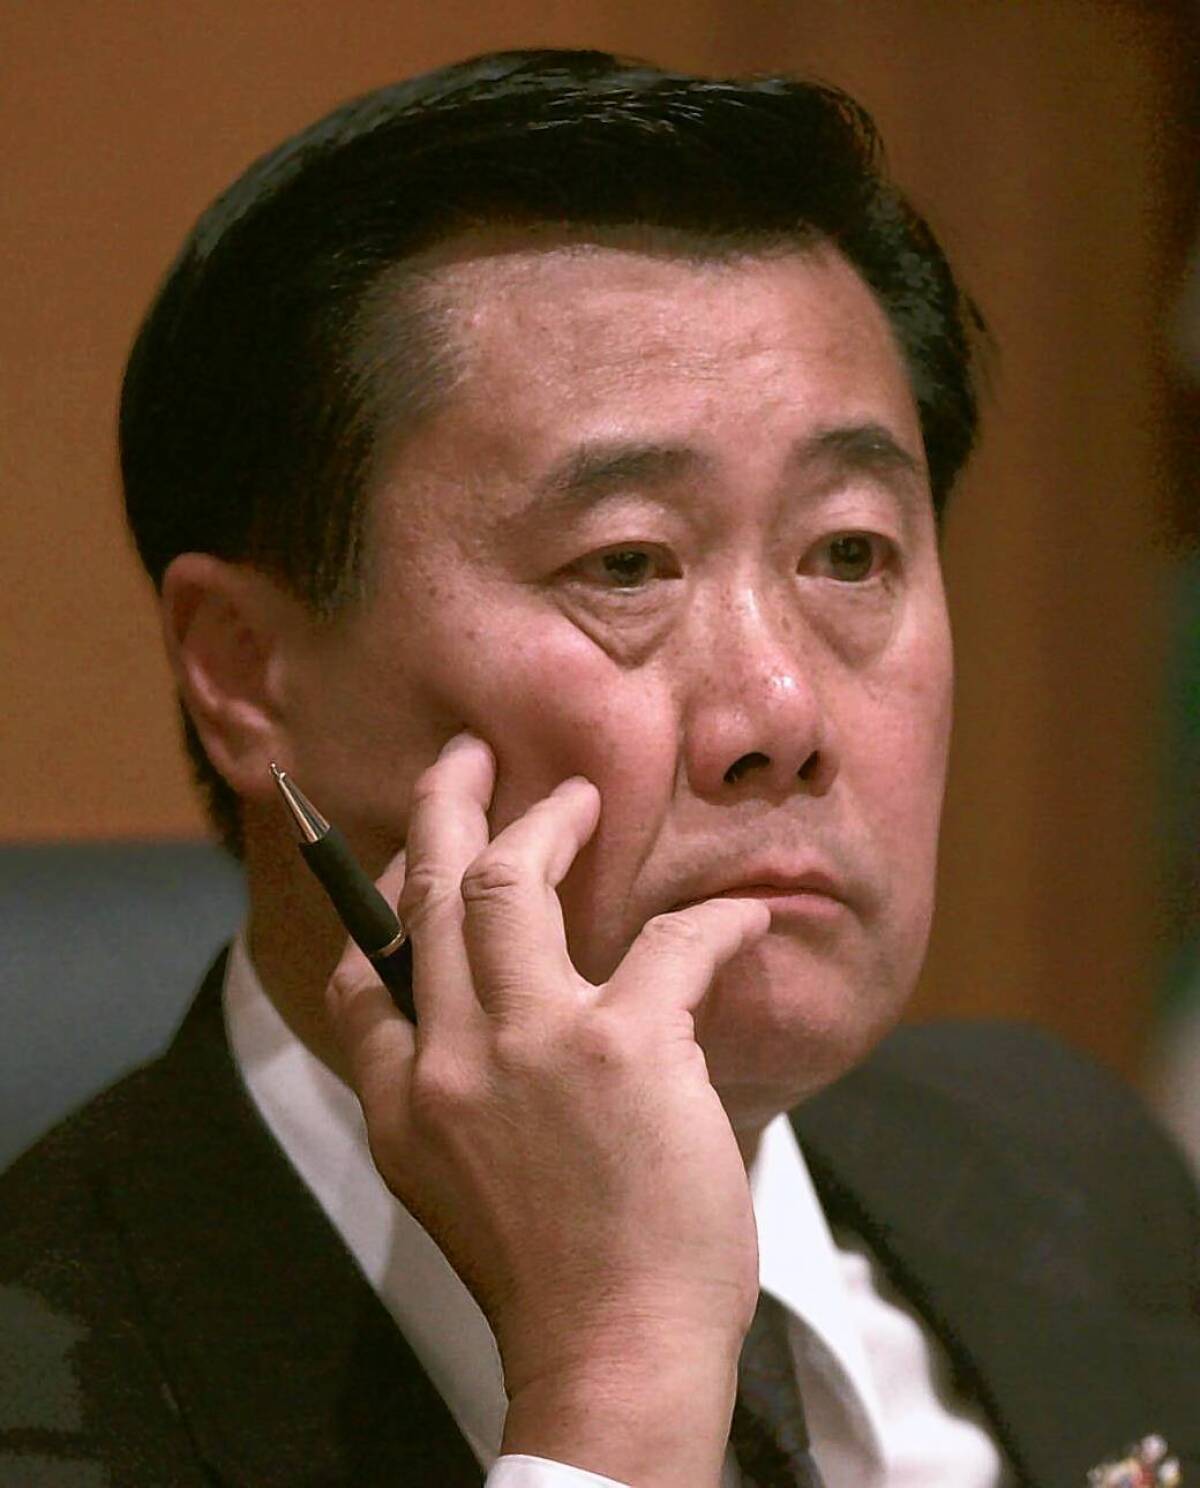 Sen. Leland Yee (D-San Francisco) received a threatening email about four weeks ago. A suspect was arrested on Tuesday.